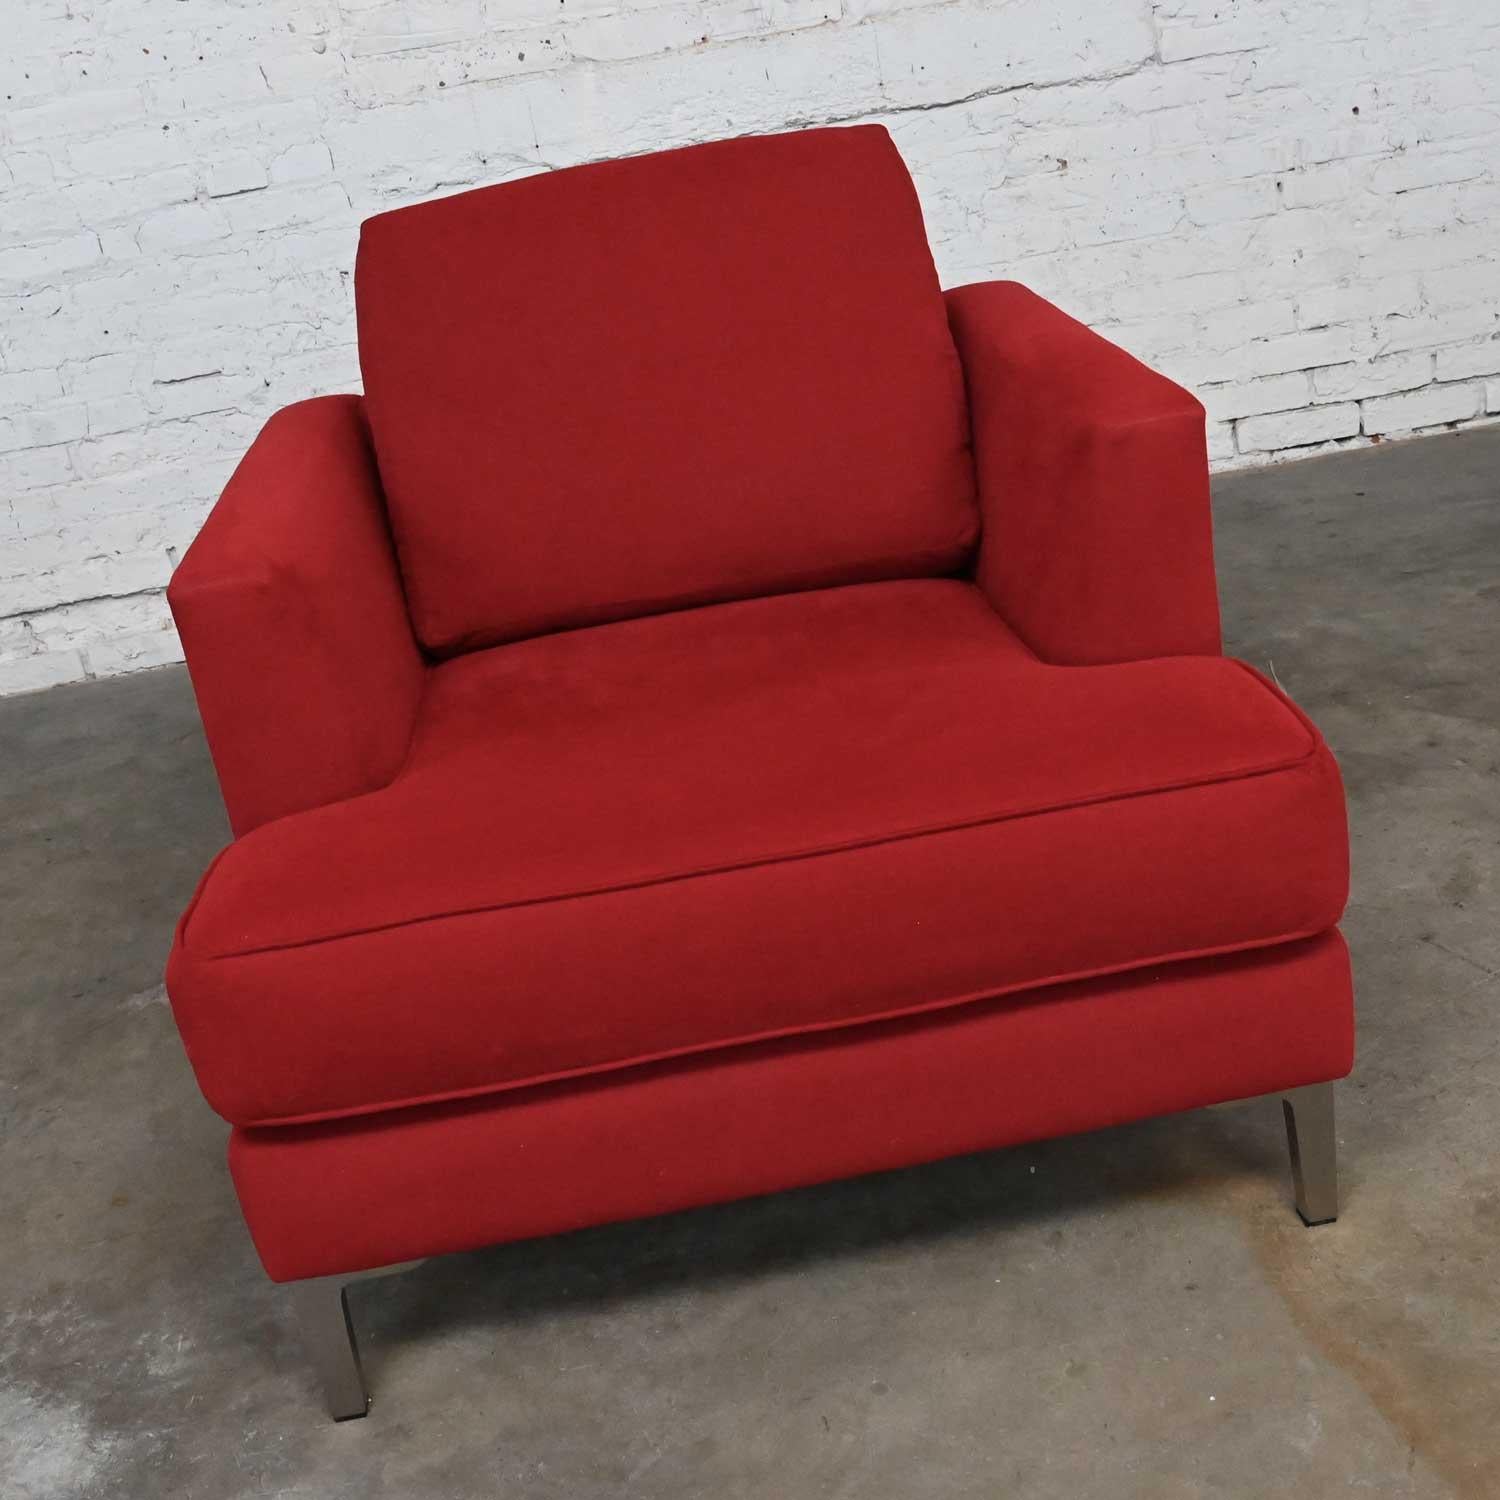 Modern Carter Club Chair Attr Zen Collection Bright Red with Polished Steel Legs 8